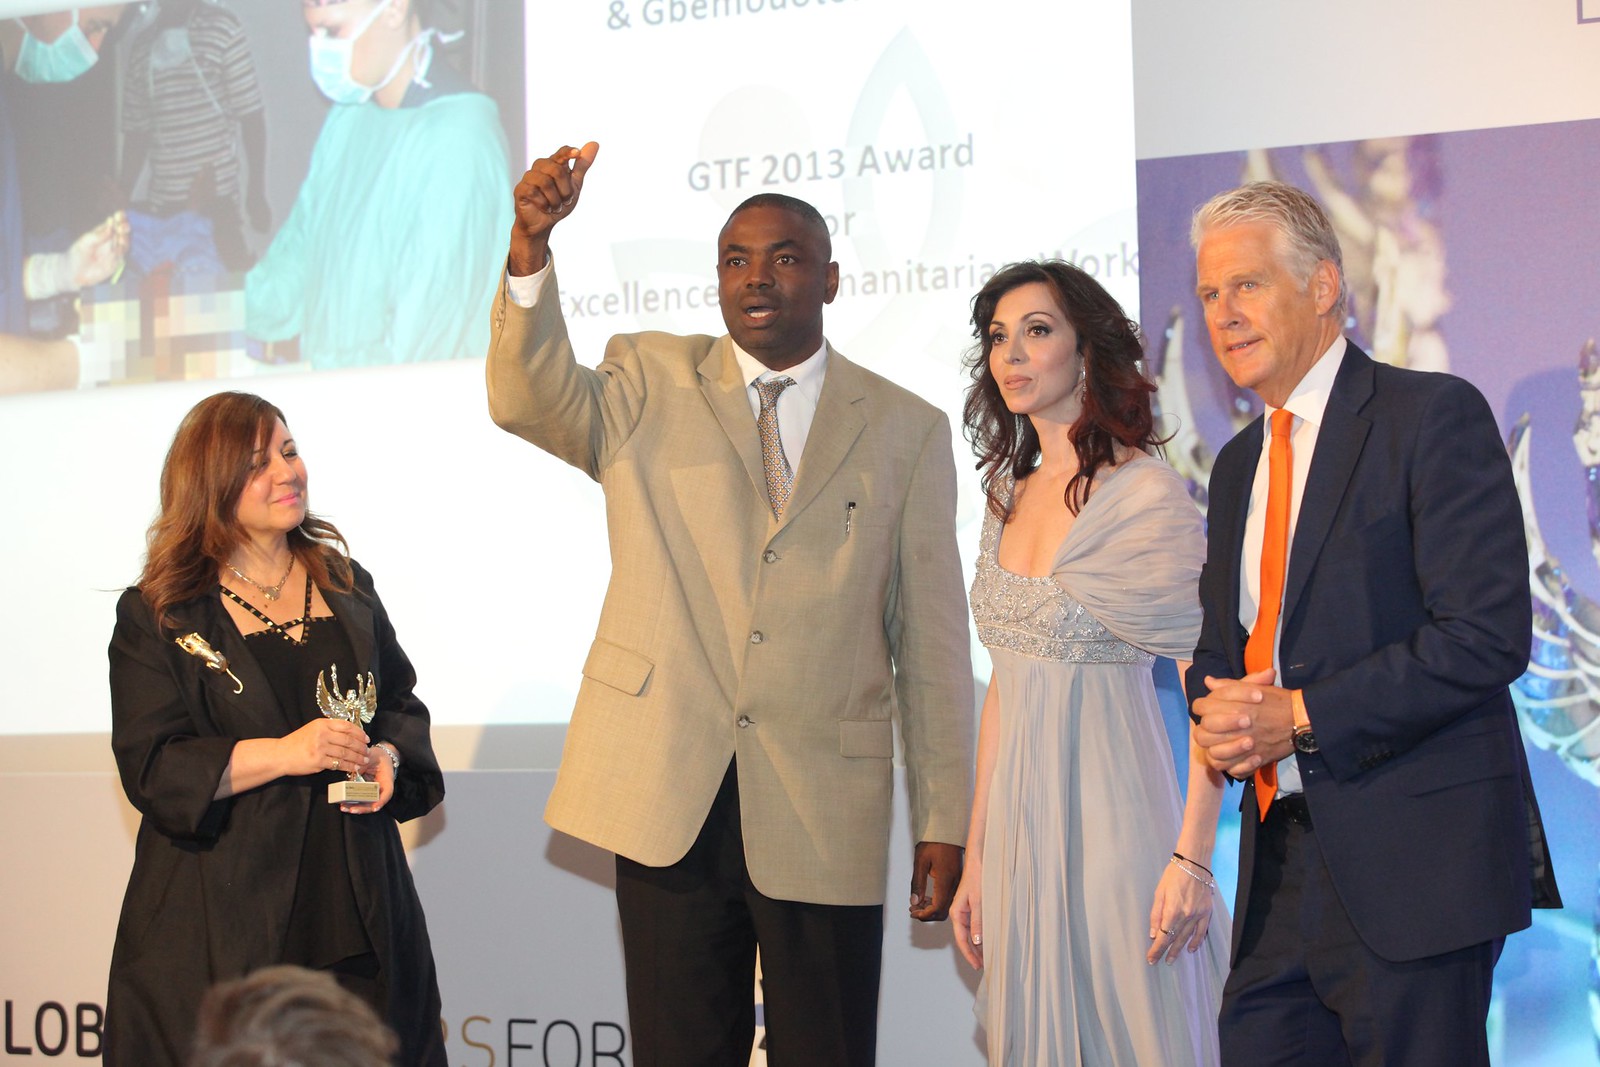 Professionals for Humanity (PROFOH) receiving GTF 2013 Award for Excellence in Humanitarian Work, Reem N. Bsaiso, Elizabeth Filippouli, Stephen Cole